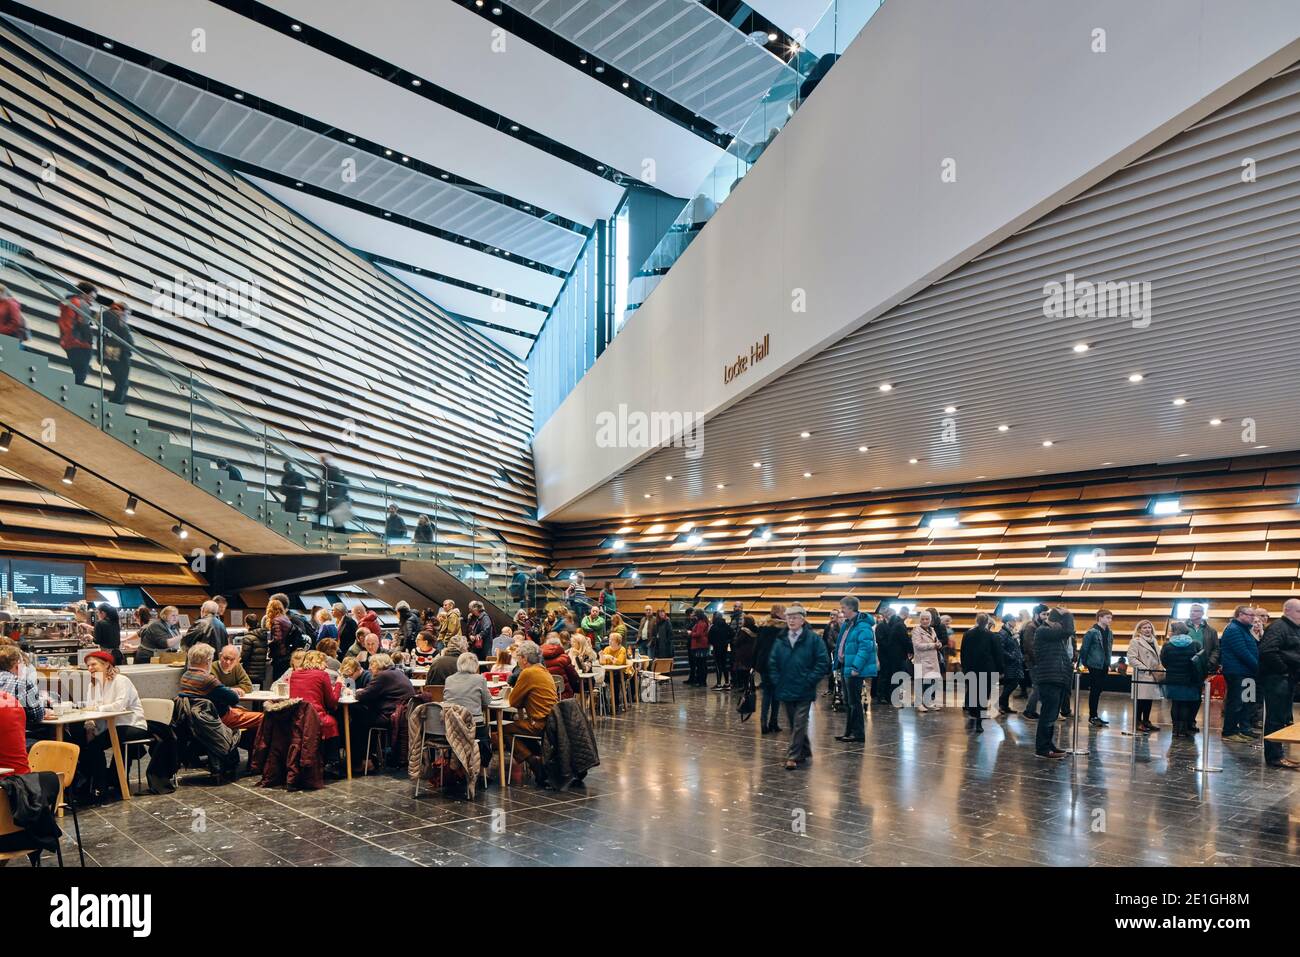 Interior view of the V&A Dundee by Japanese architect Kengo Kuma, a design museum on the waterfront of Dundee, Scotland, UK. Stock Photo